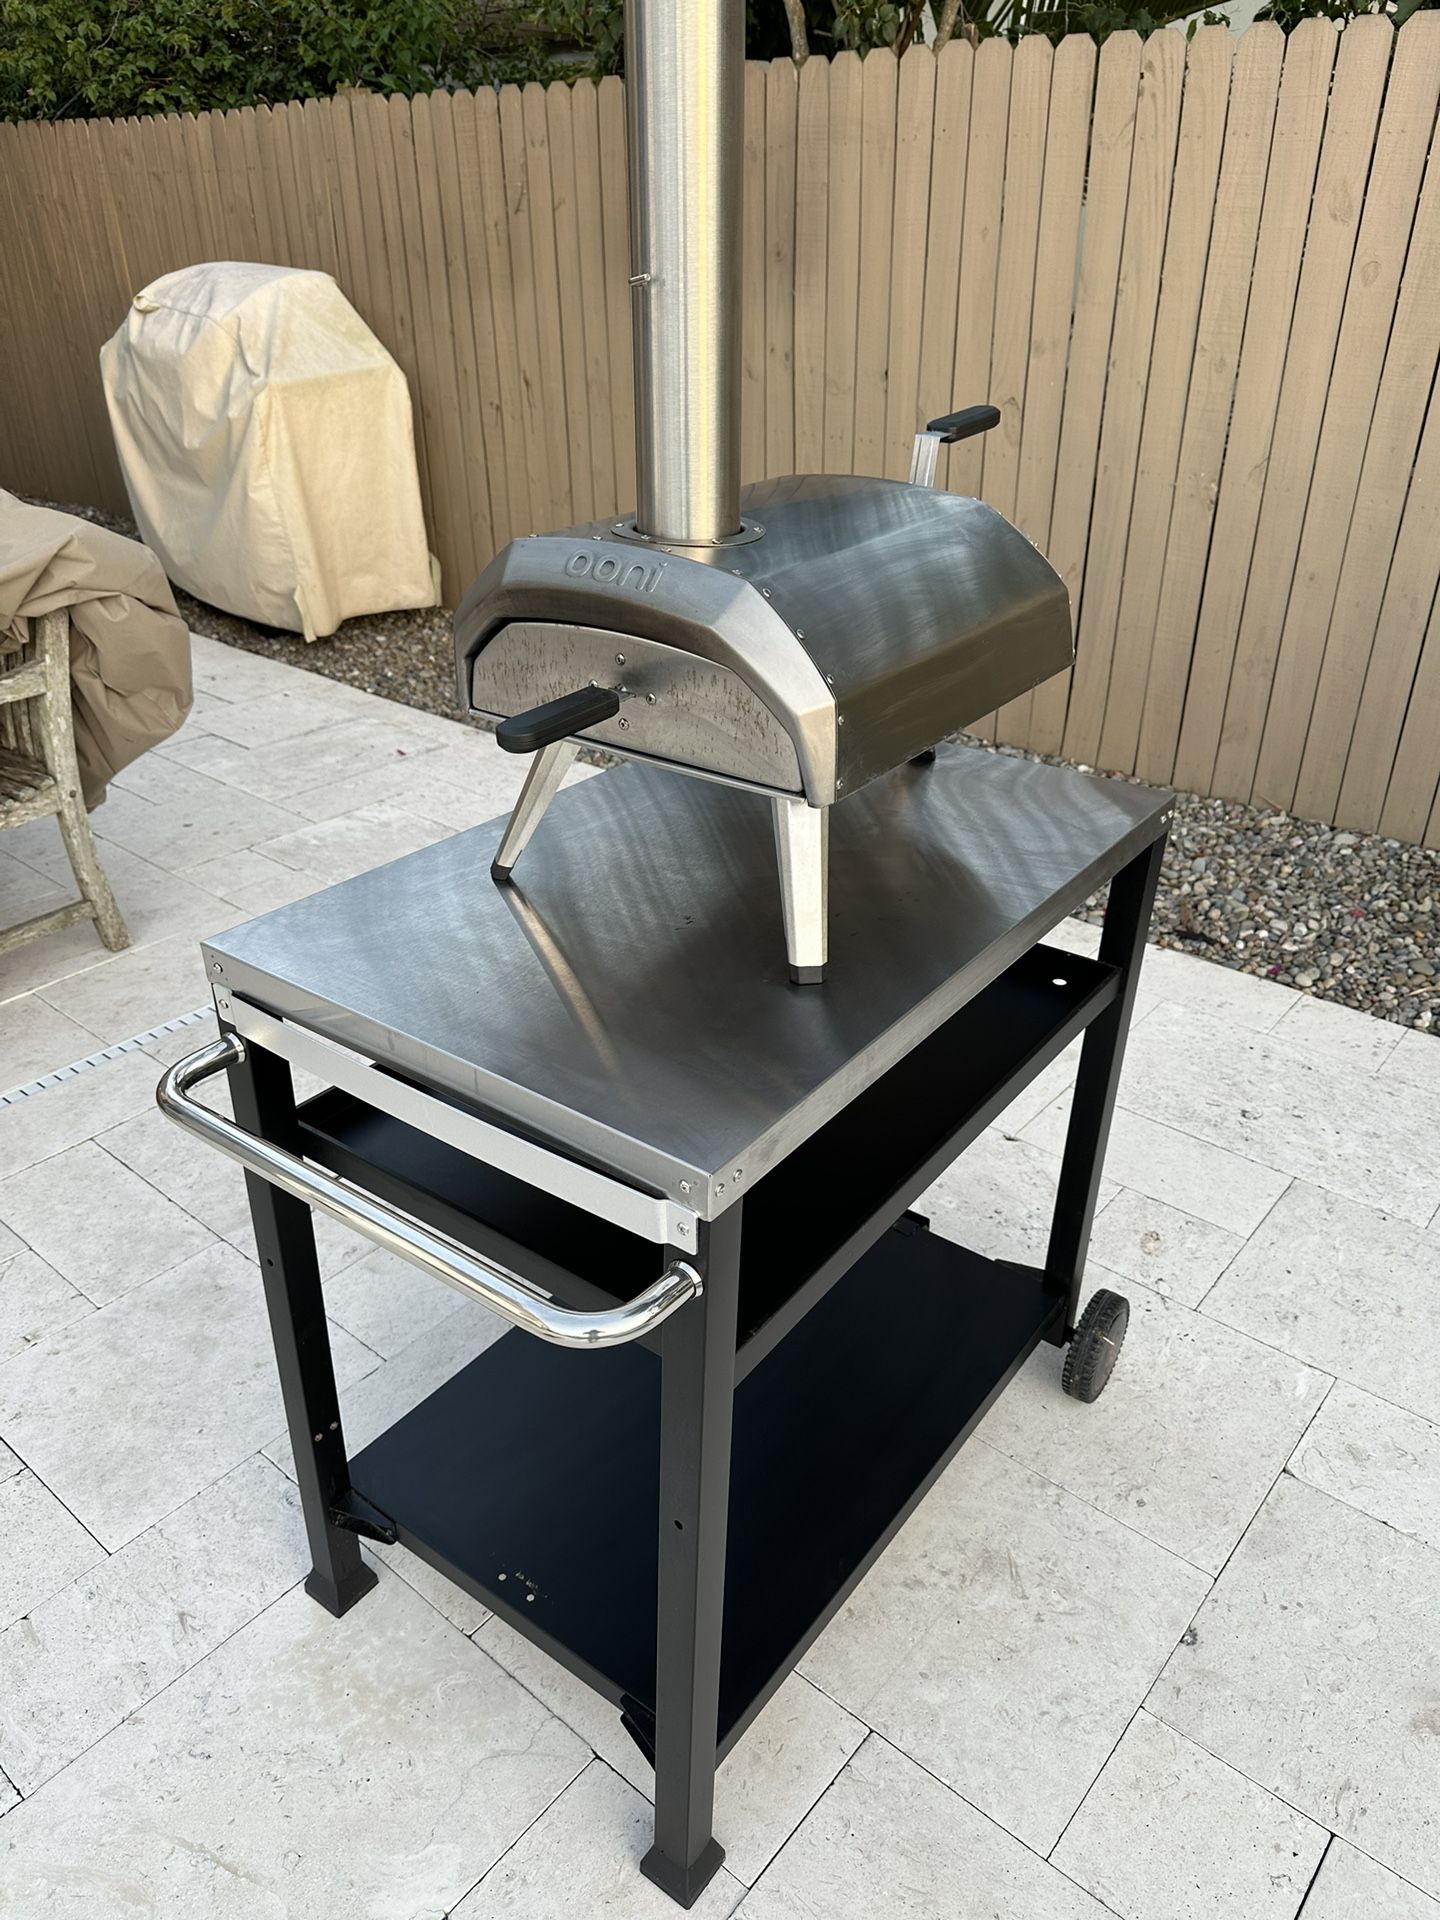 Ooni Karu 12 Pizza Oven With Outdoor Cart